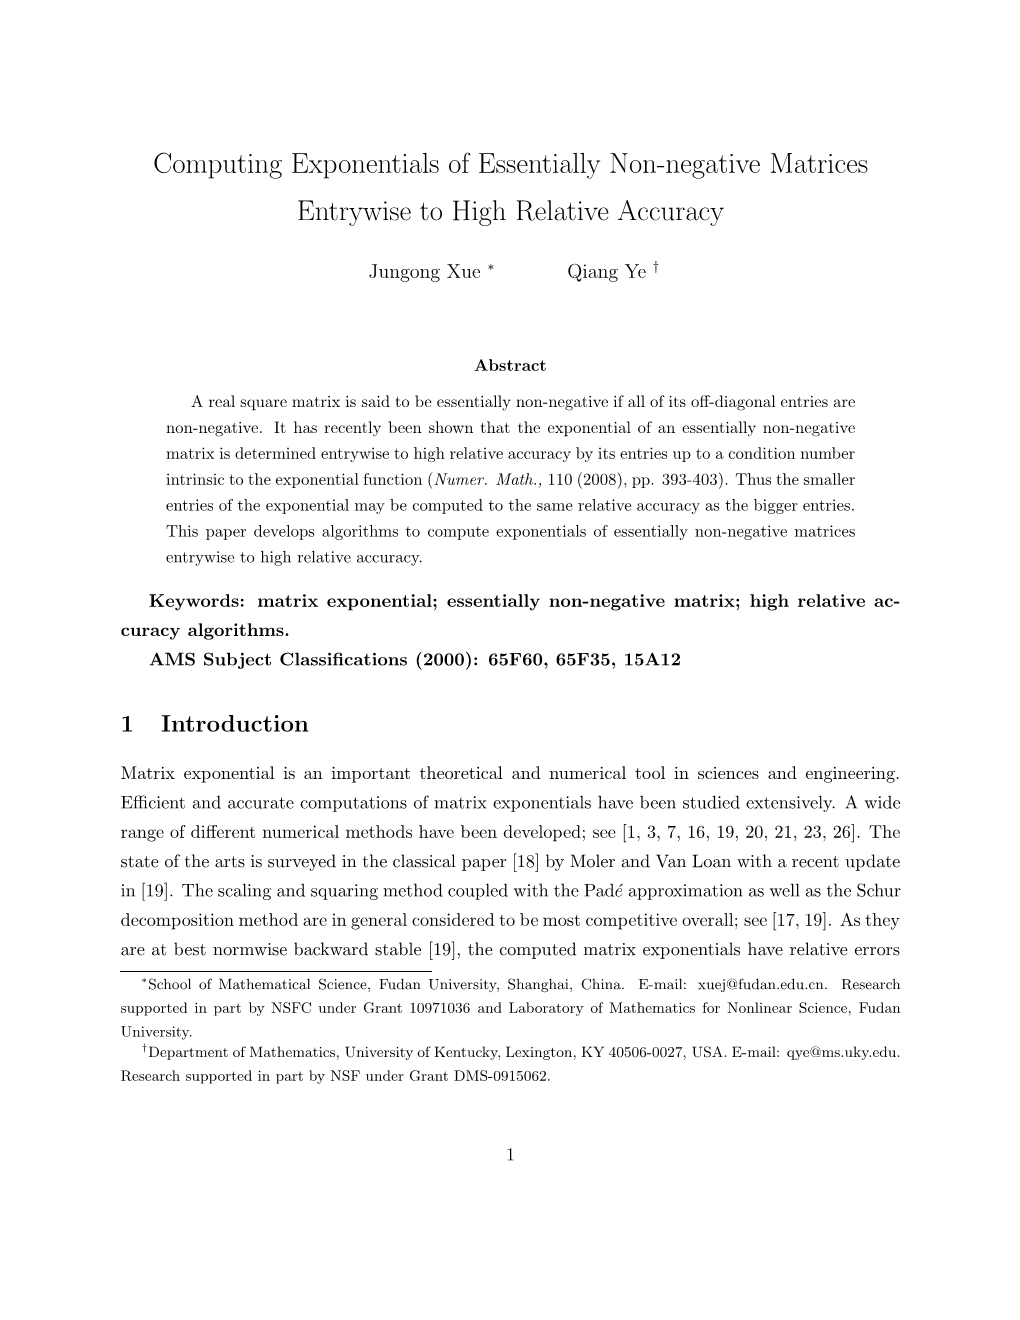 Computing Exponentials of Essentially Non-Negative Matrices Entrywise to High Relative Accuracy